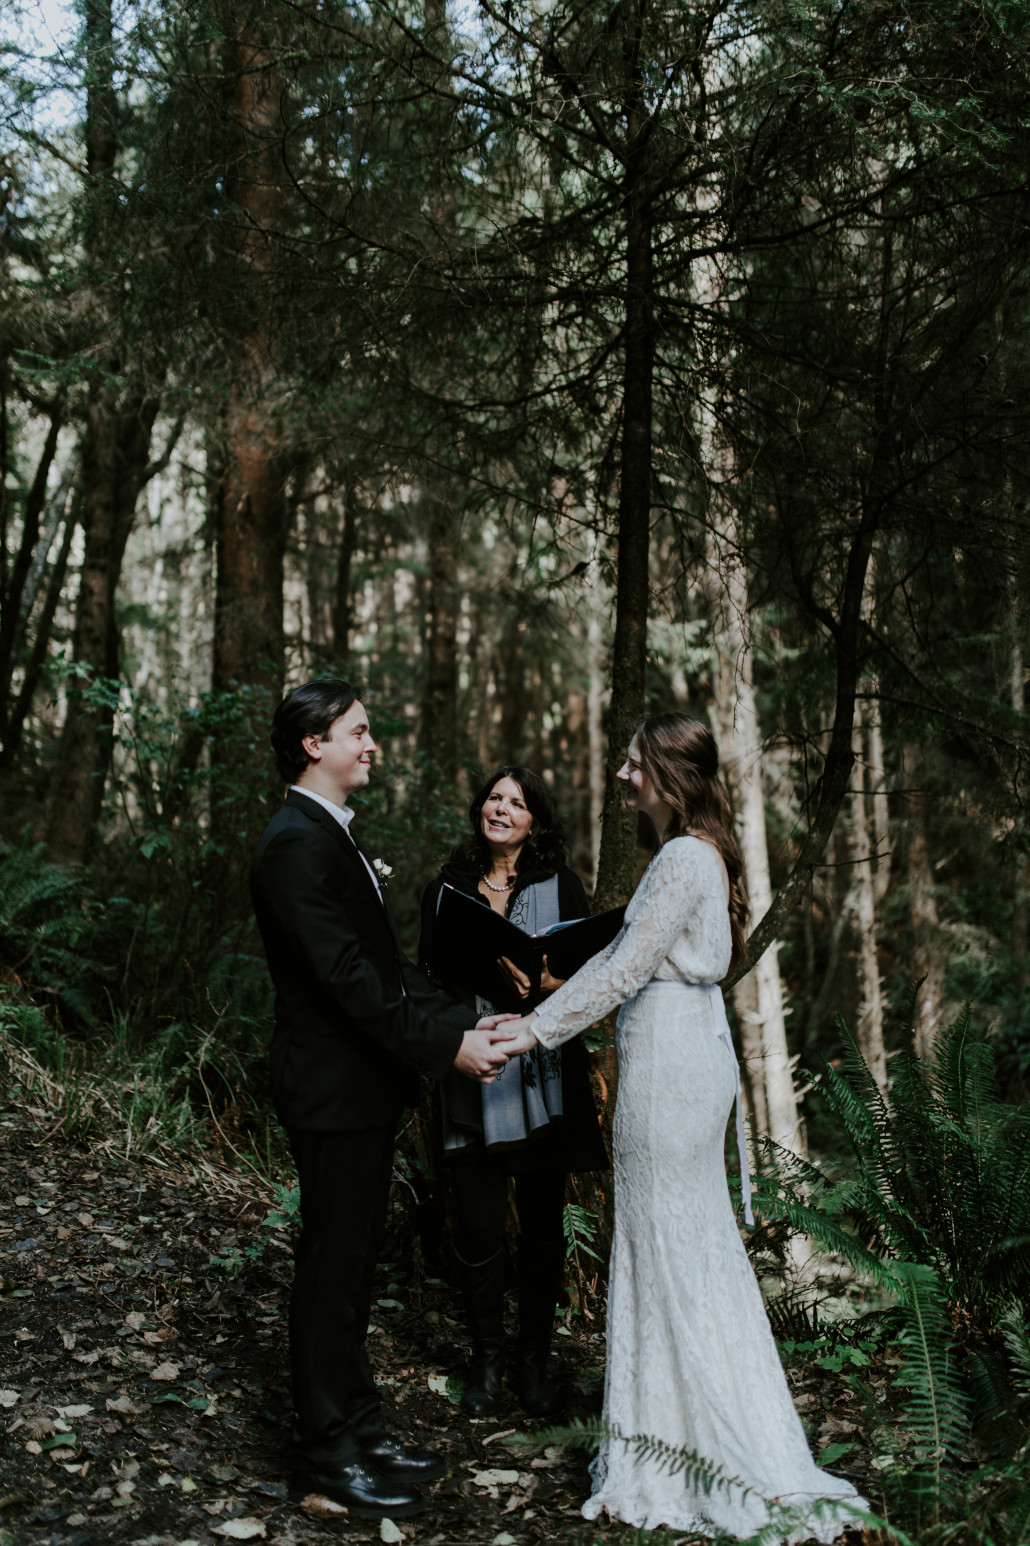 Nicole and Vlad pledge their love for each other at Cannon Beach. Elopement wedding photography at Cannon Beach by Sienna Plus Josh.